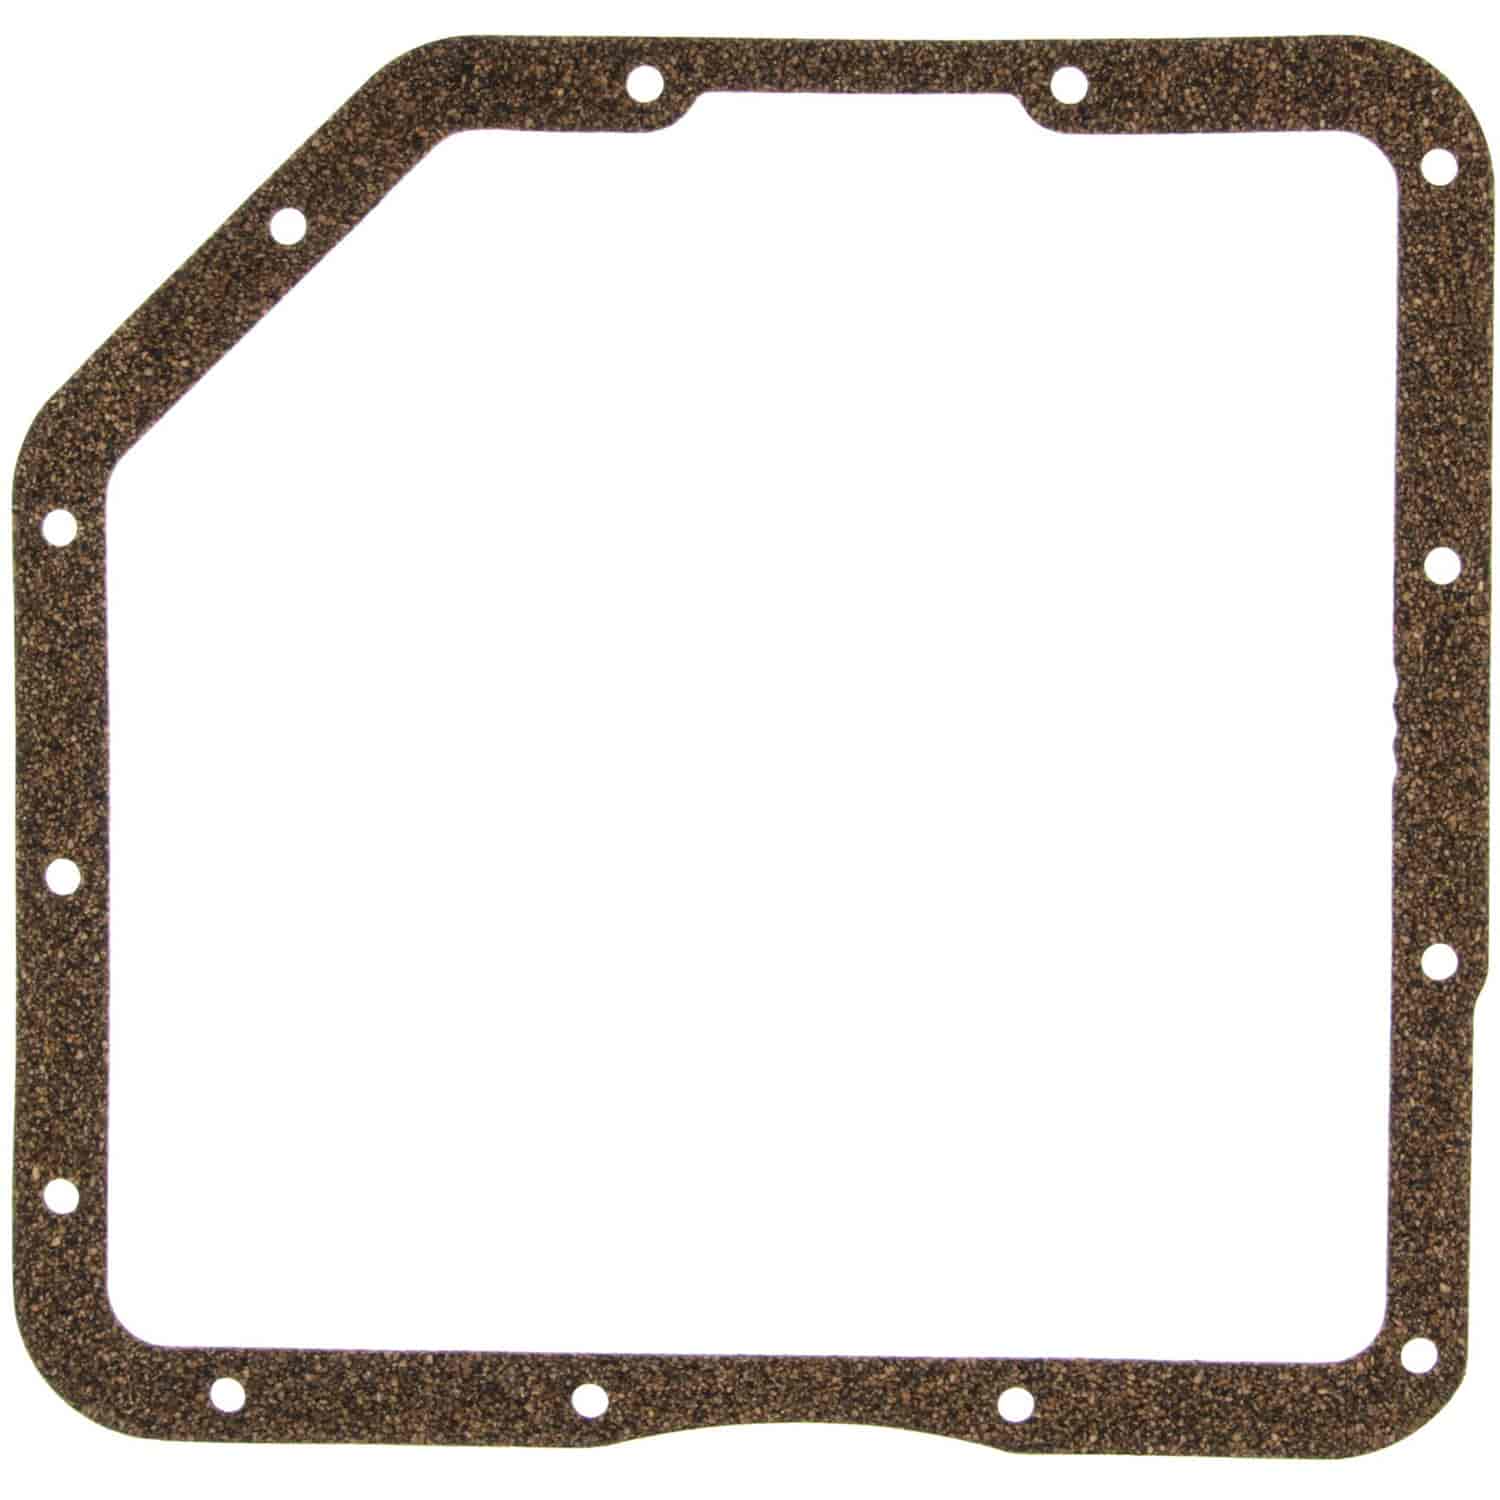 Automatic Transmission Gasket 1968-1985 GM TH350 in Cork-Rubber